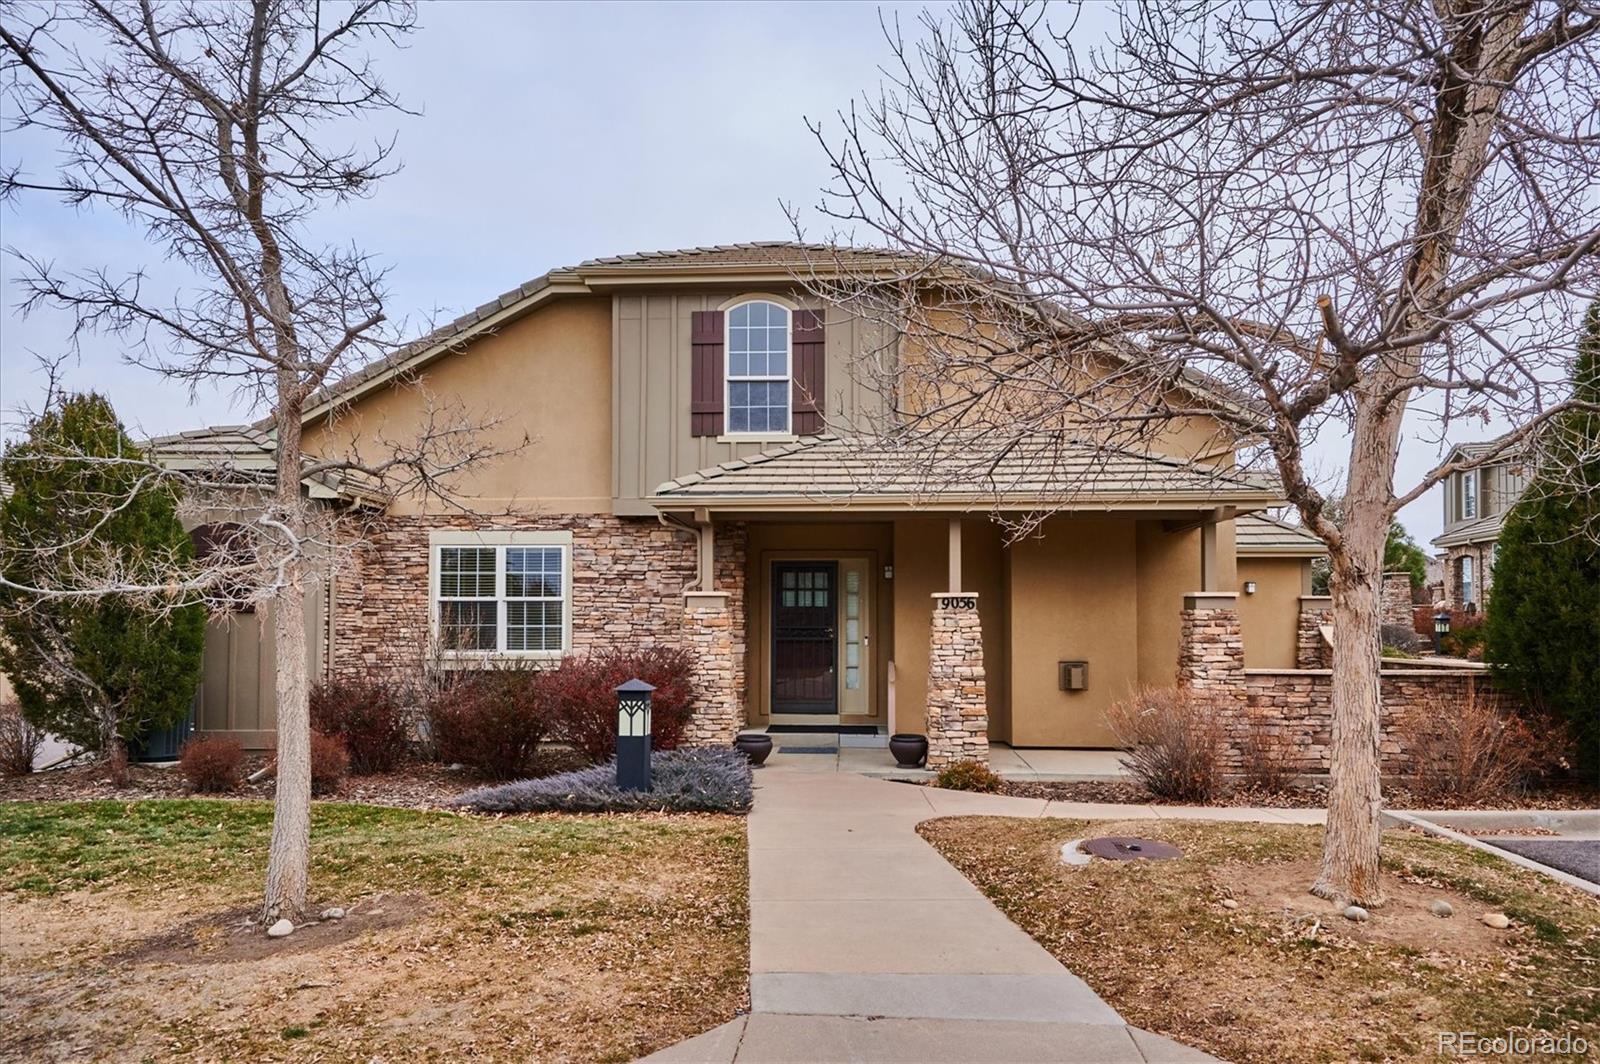 9056  old tom morris circle, highlands ranch sold home. Closed on 2024-02-02 for $630,000.